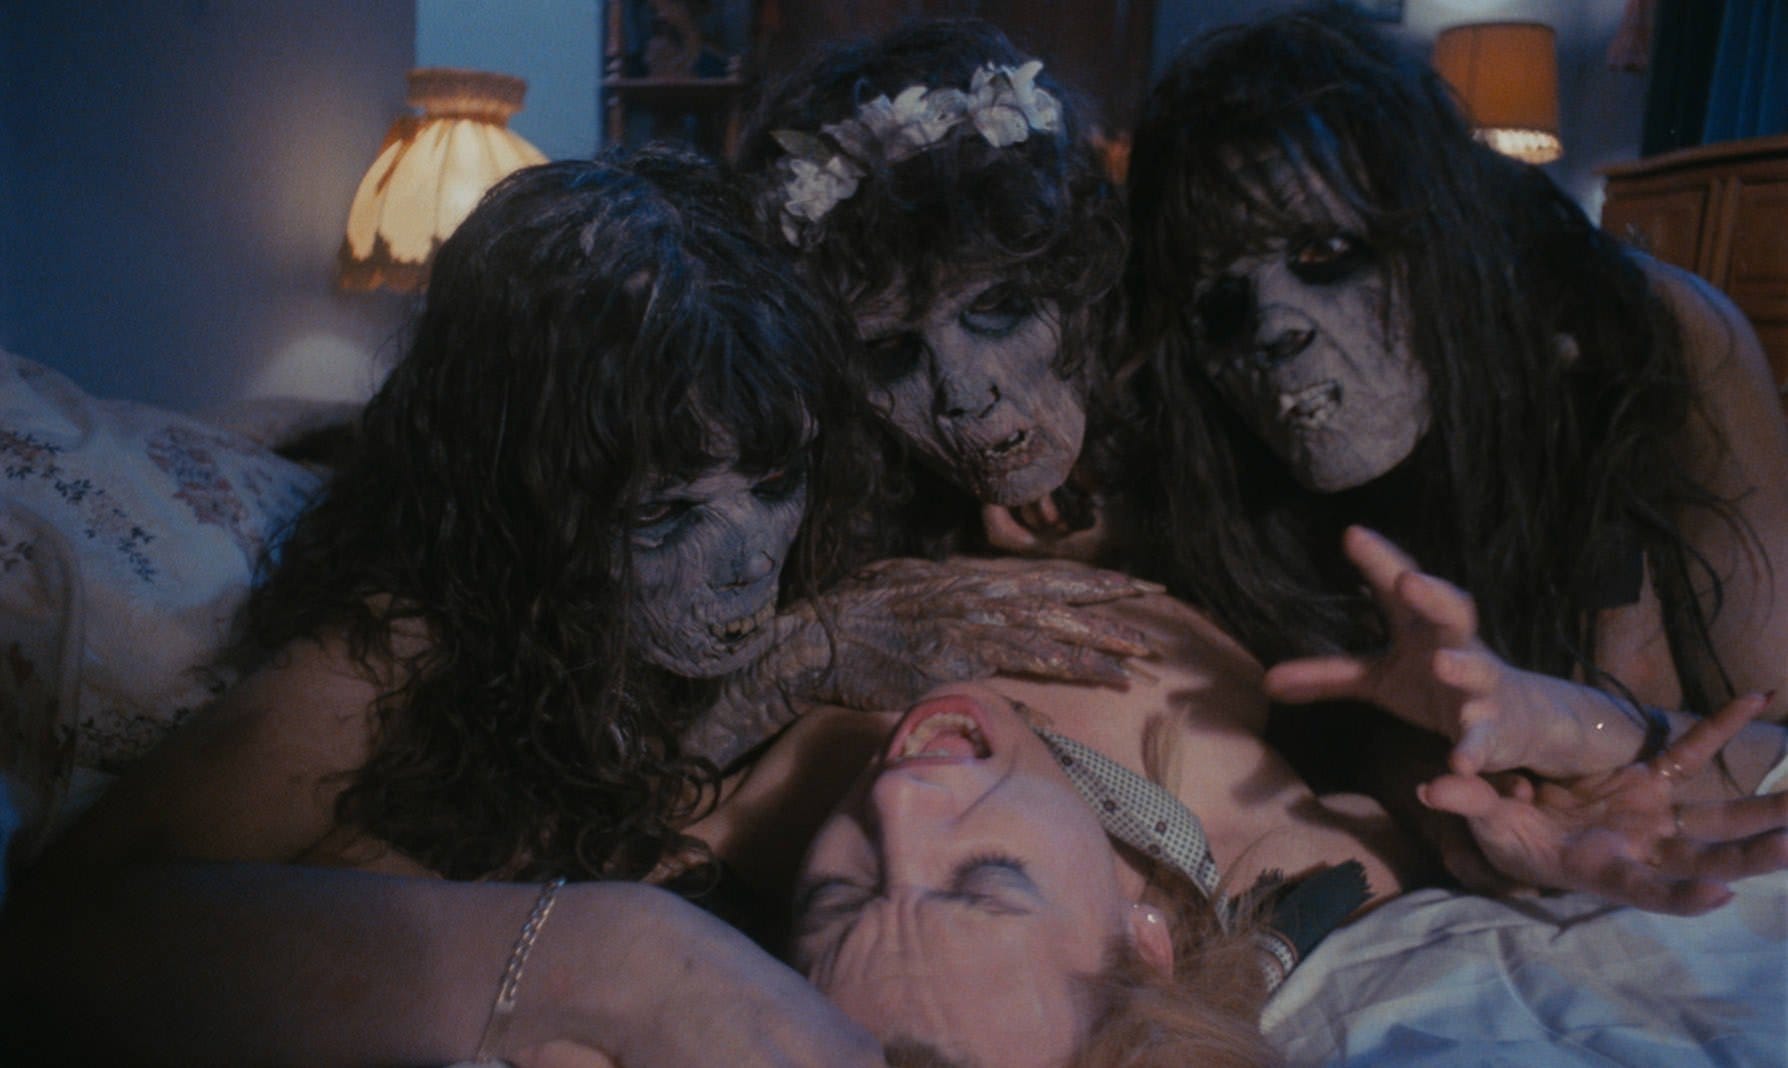 French Frights Revenge of the Living Dead Girls by Basile Lebret Keeping it spooky Medium pic